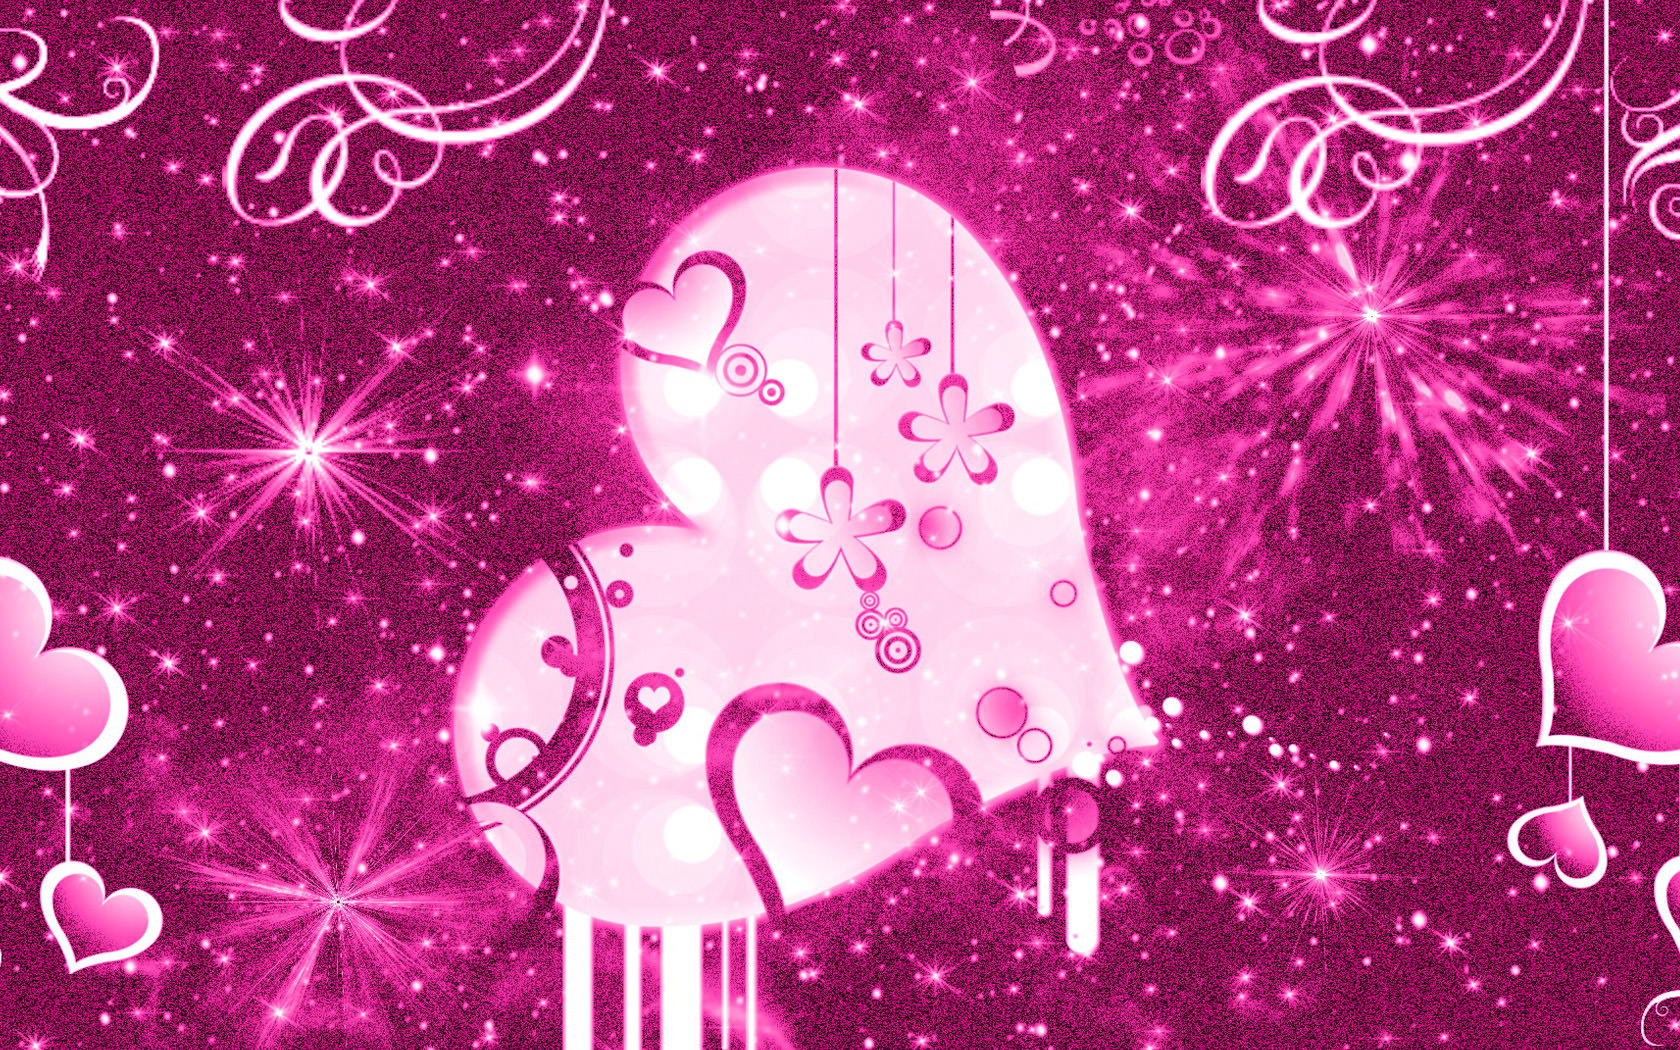 21+ Girly Wallpapers, Pink Backgrounds, Images, Pictures | FreeCreatives